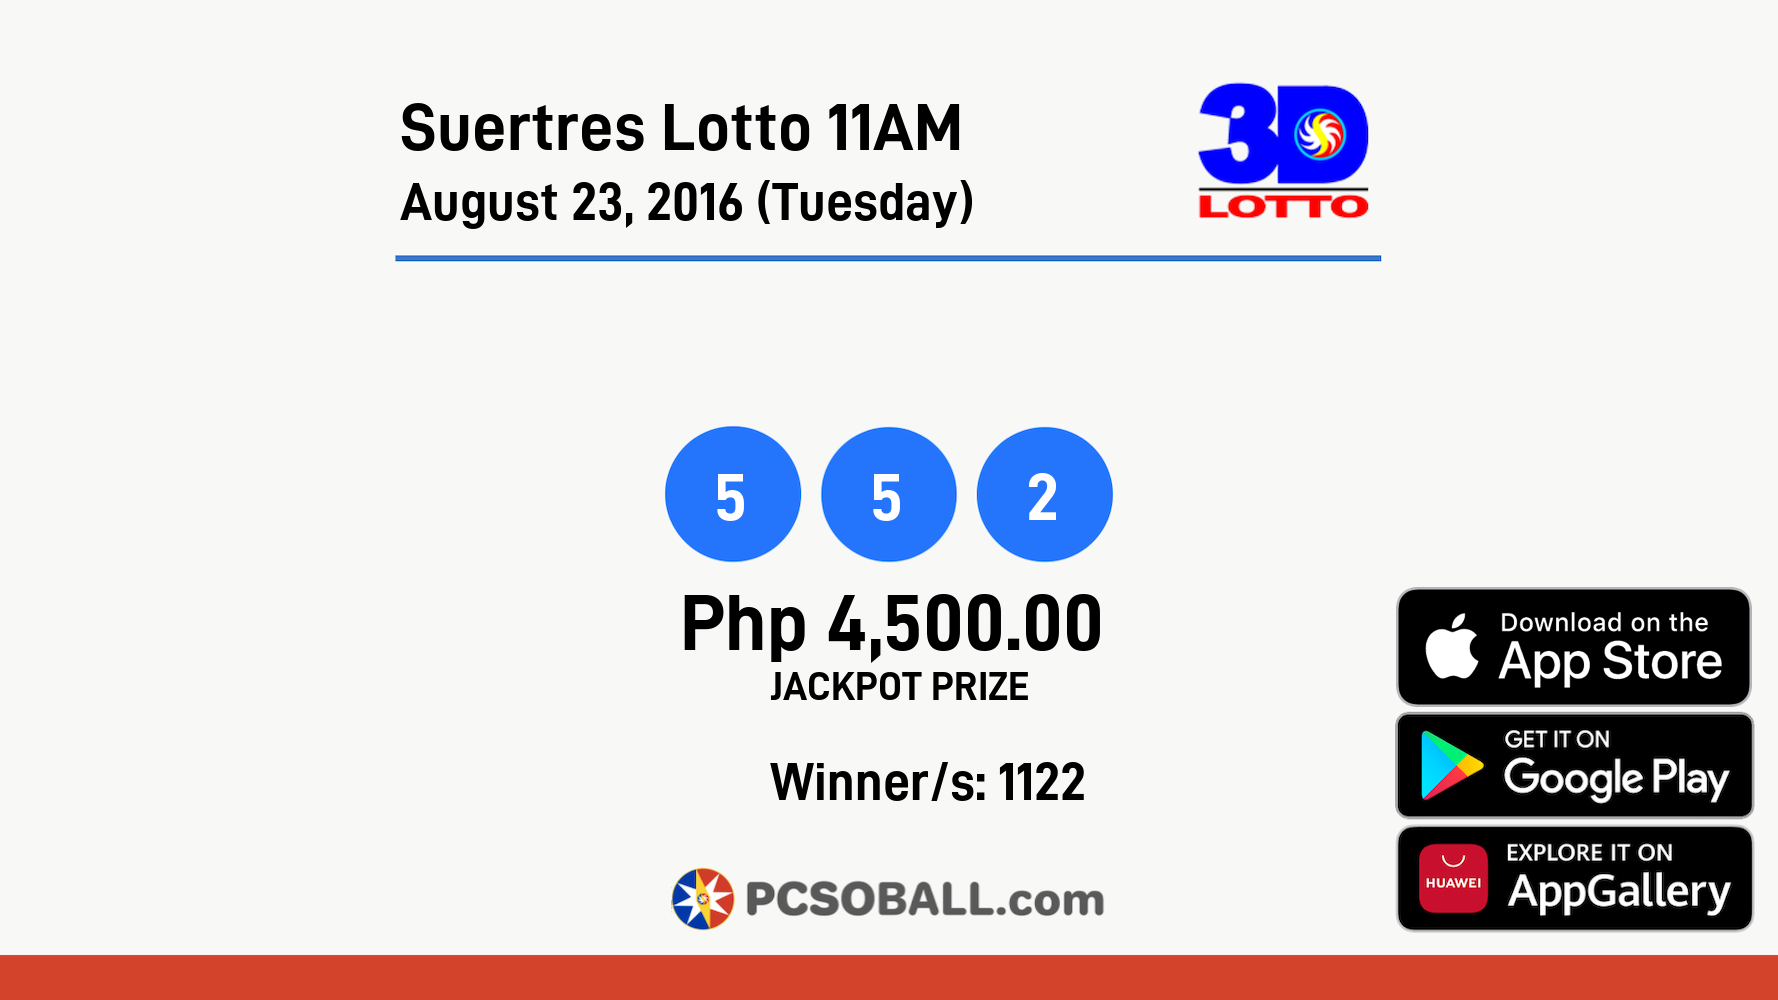 Suertres Lotto 11AM August 23, 2016 (Tuesday) Result